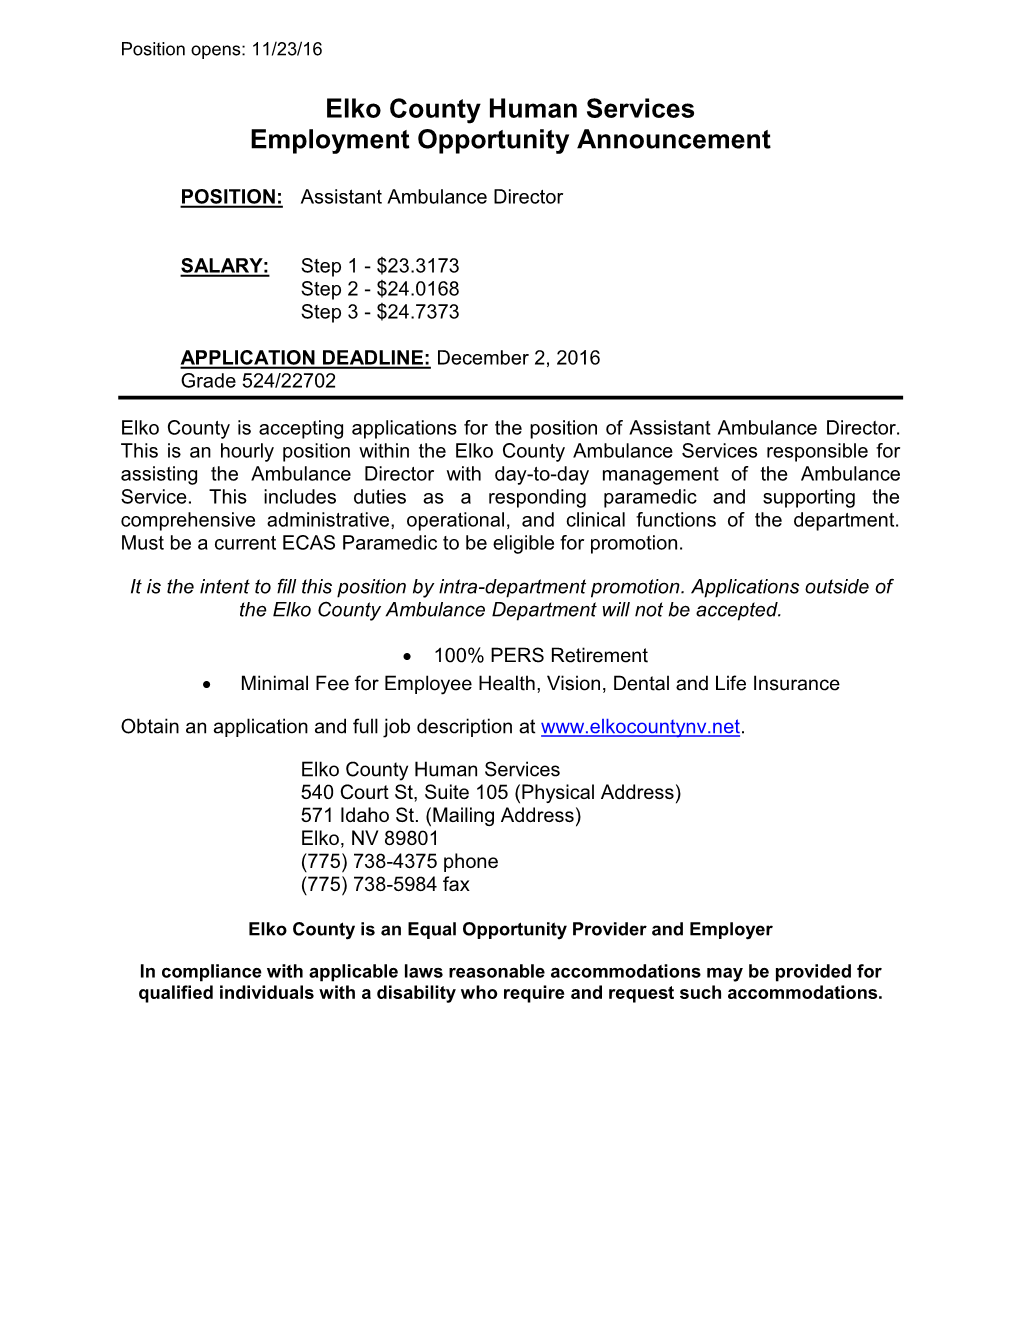 Elko County Human Services Employment Opportunity Announcement